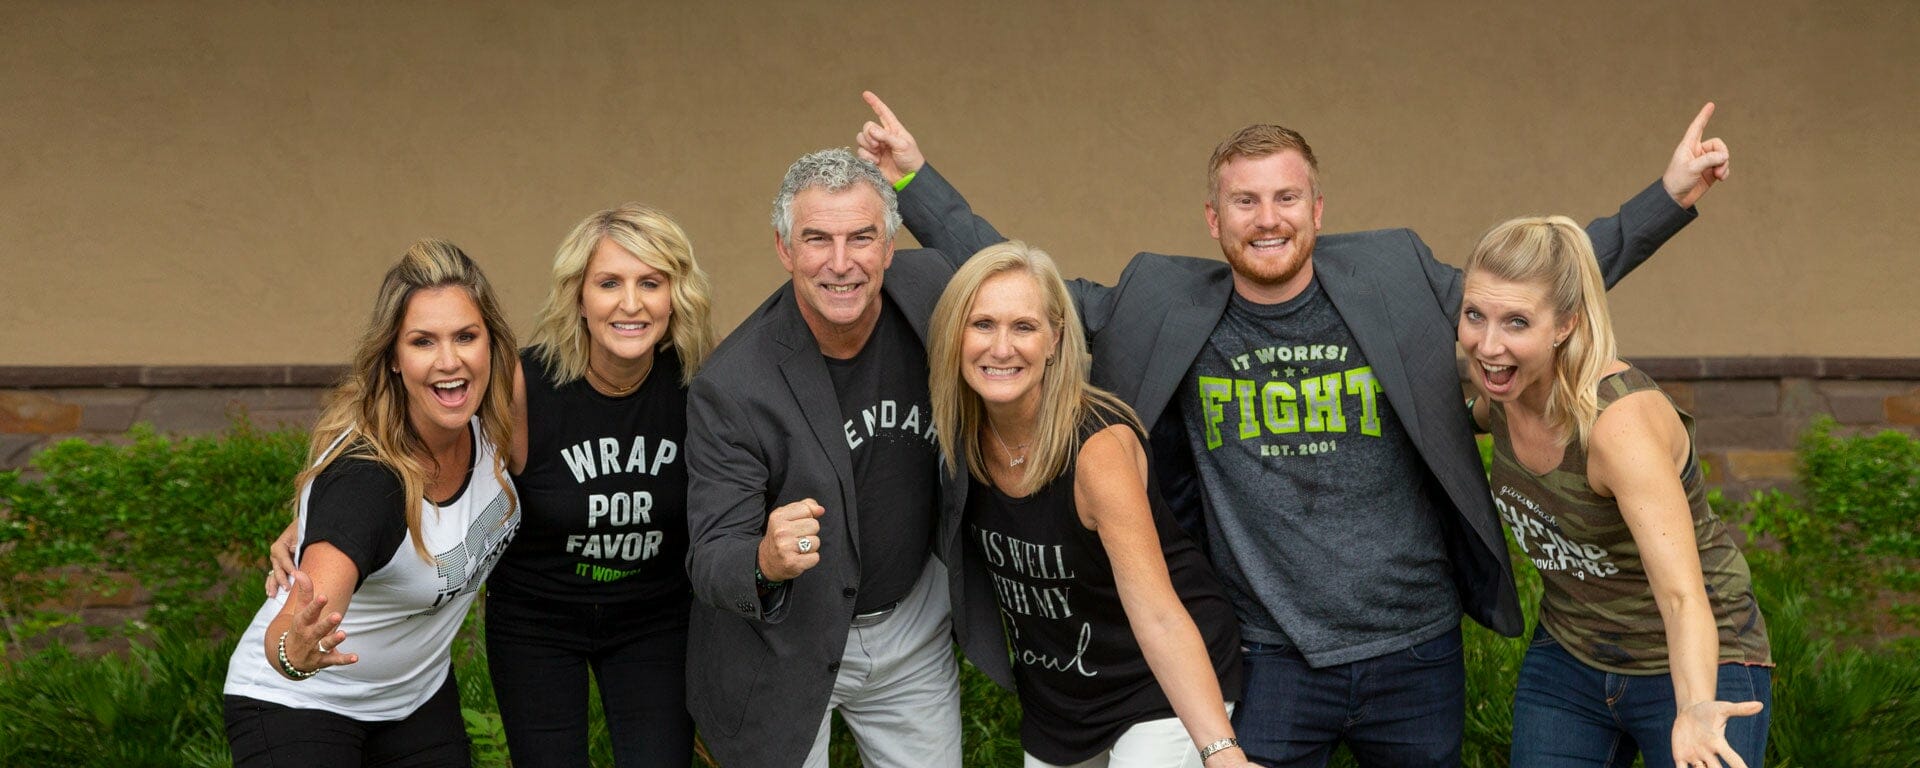 itworks founders mark and cindy pentecost